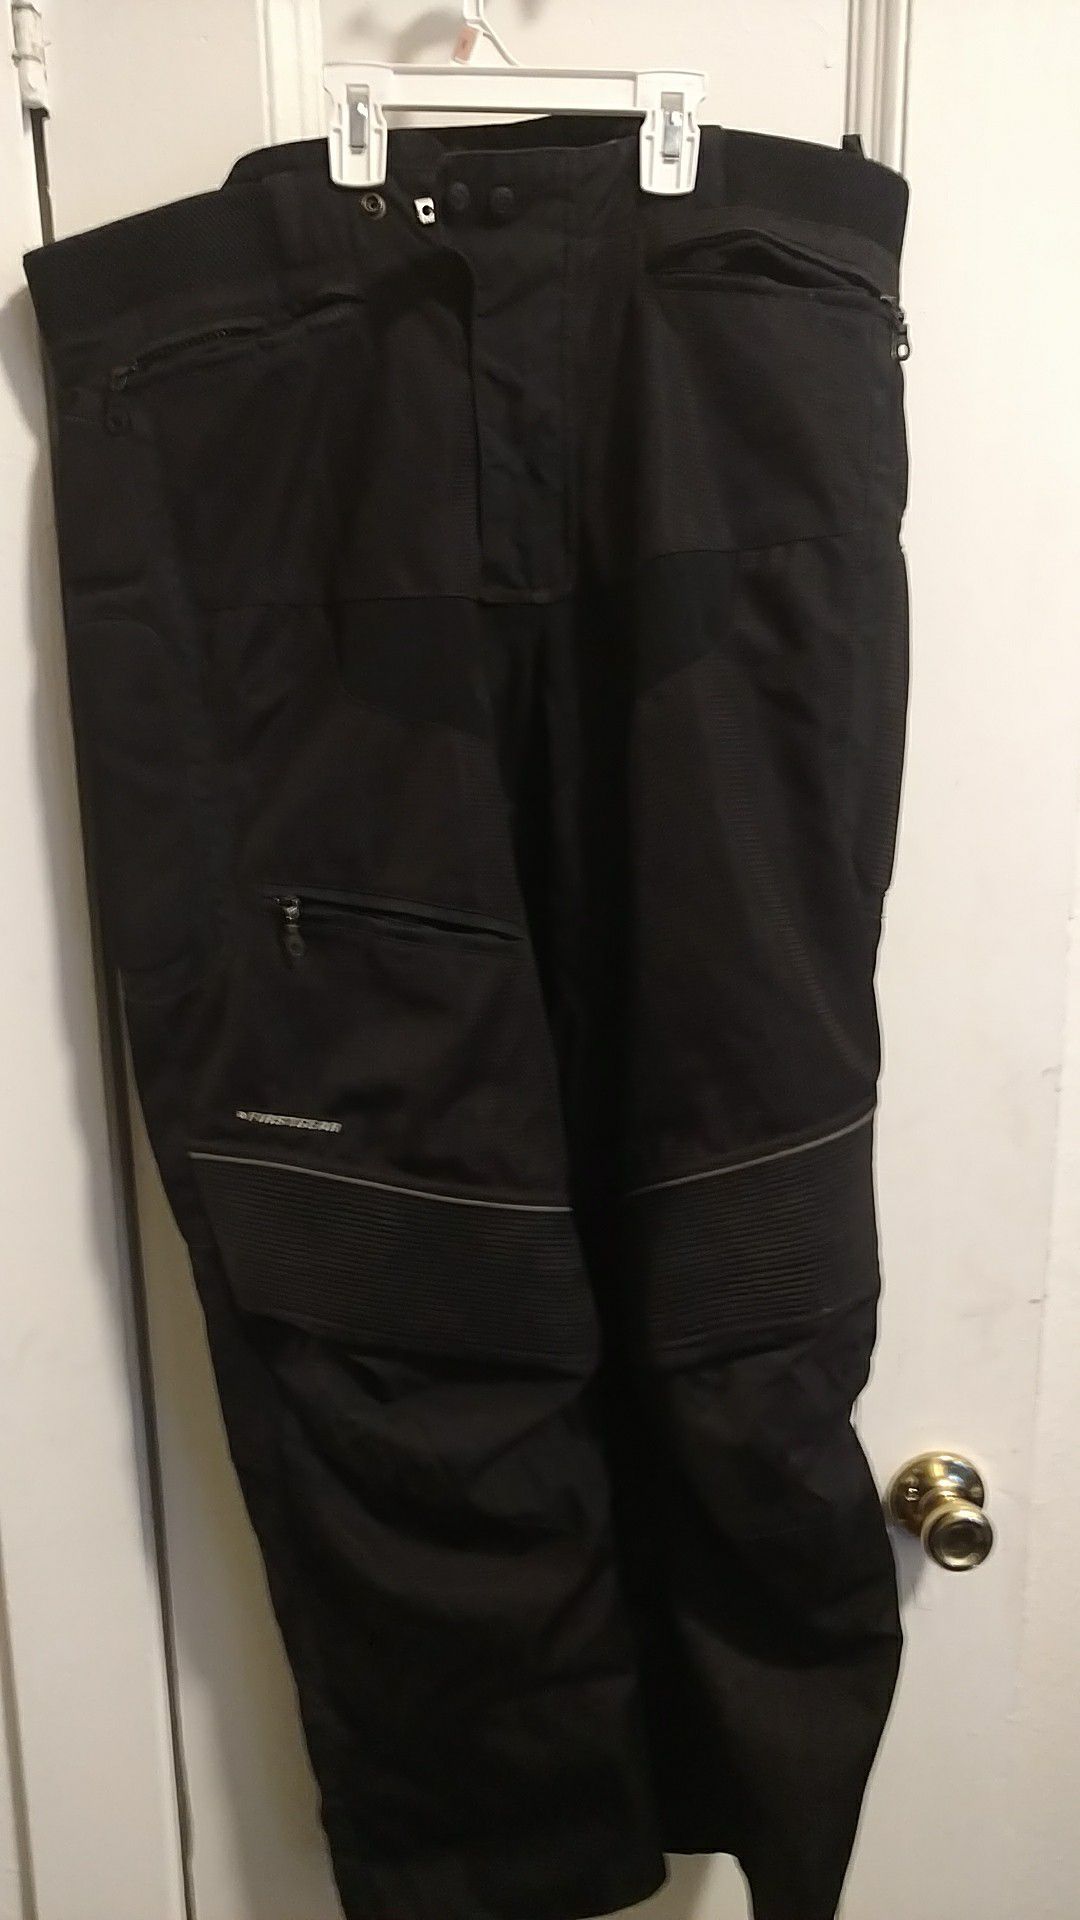 First gear. Motorcycle pants